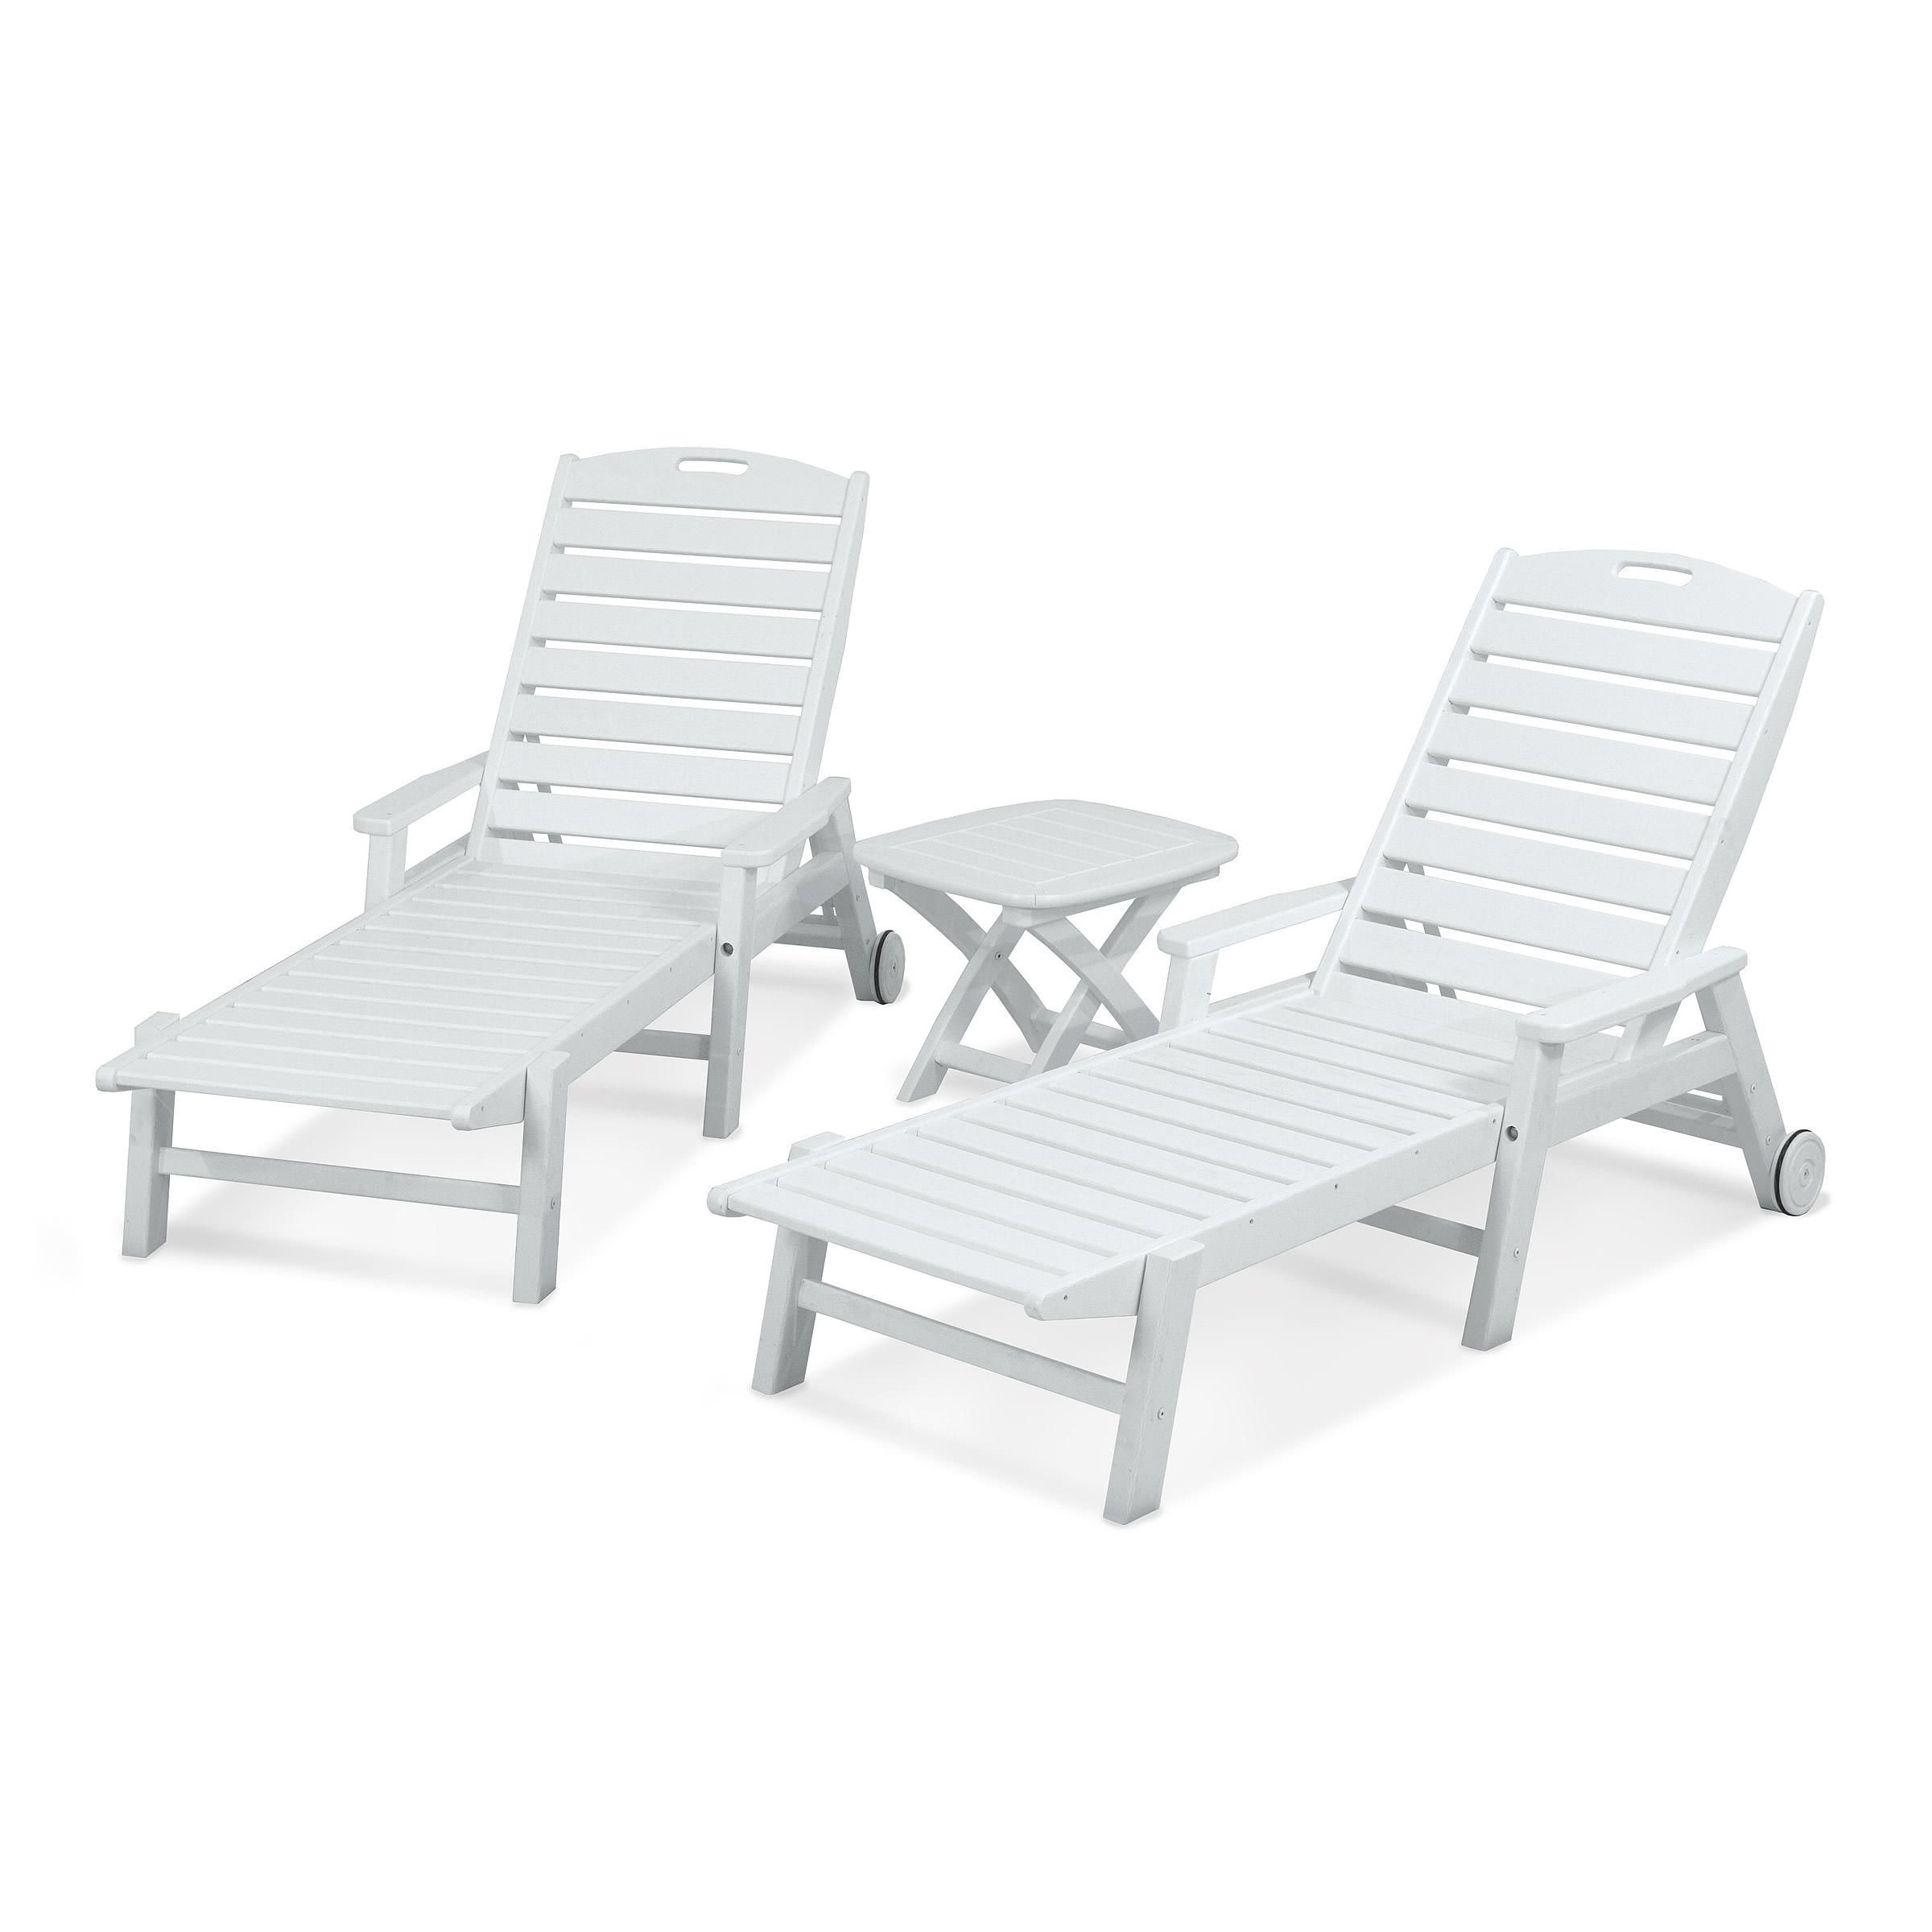 Nautical 3 Piece Outdoor Chaise Lounge Sets With Table Regarding Trendy Polywood® Nautical 3 Piece Chaise Set (View 5 of 25)